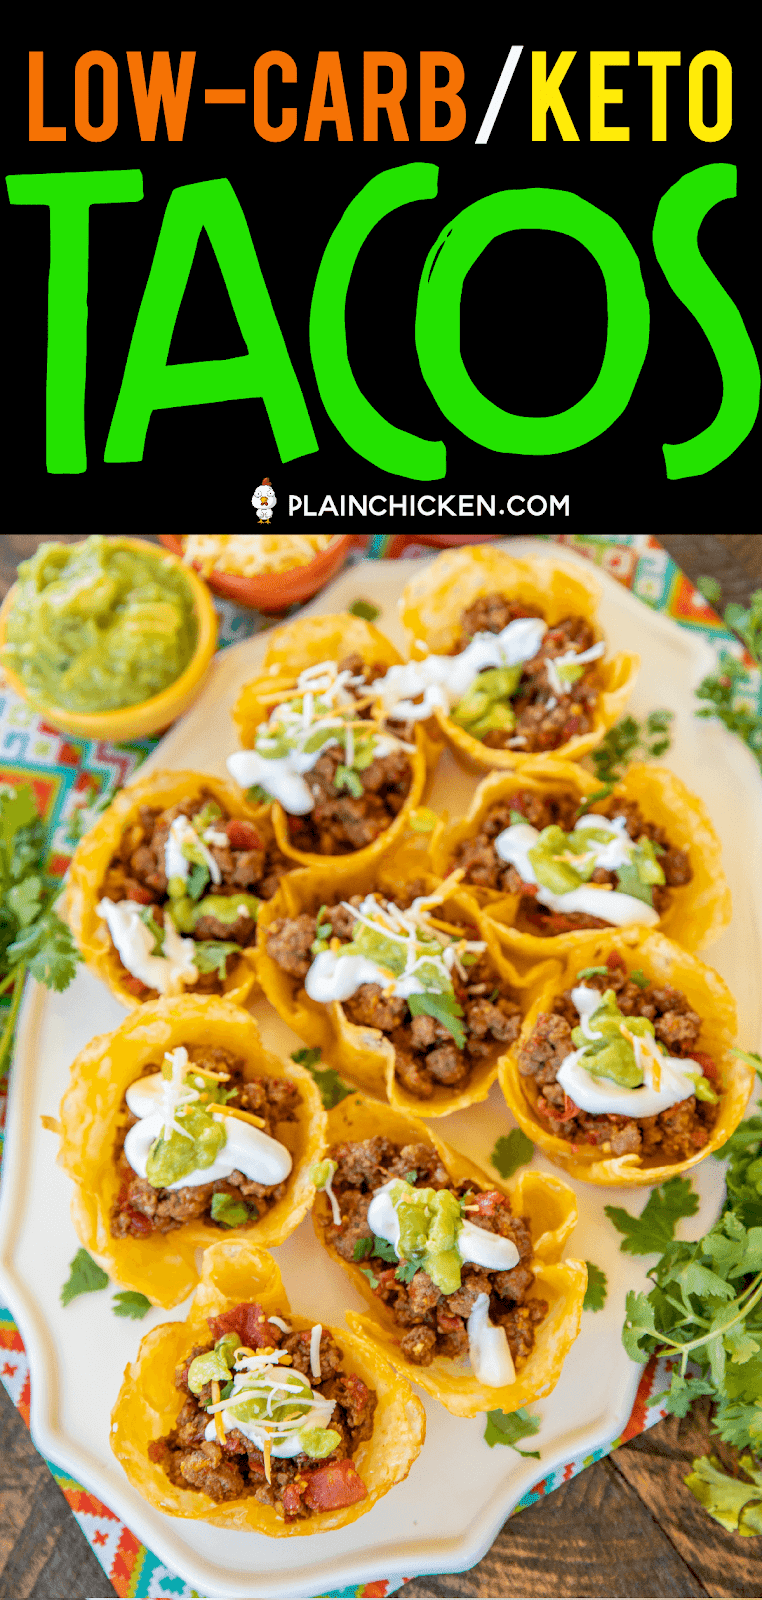 Low-Carb Keto Tacos - all the flavors of tacos without all the carbs! The shells are made out of cheese! OMG! YUM! Cheese, ground beef or turkey, taco seasoning, diced tomatoes and green chiles, and water. Ready to eat in minutes. Can make shells ahead of time for a quick weeknight meal. You'll never miss the carbs! #lowcarb #keto #tacos #mexicanfood #texmex